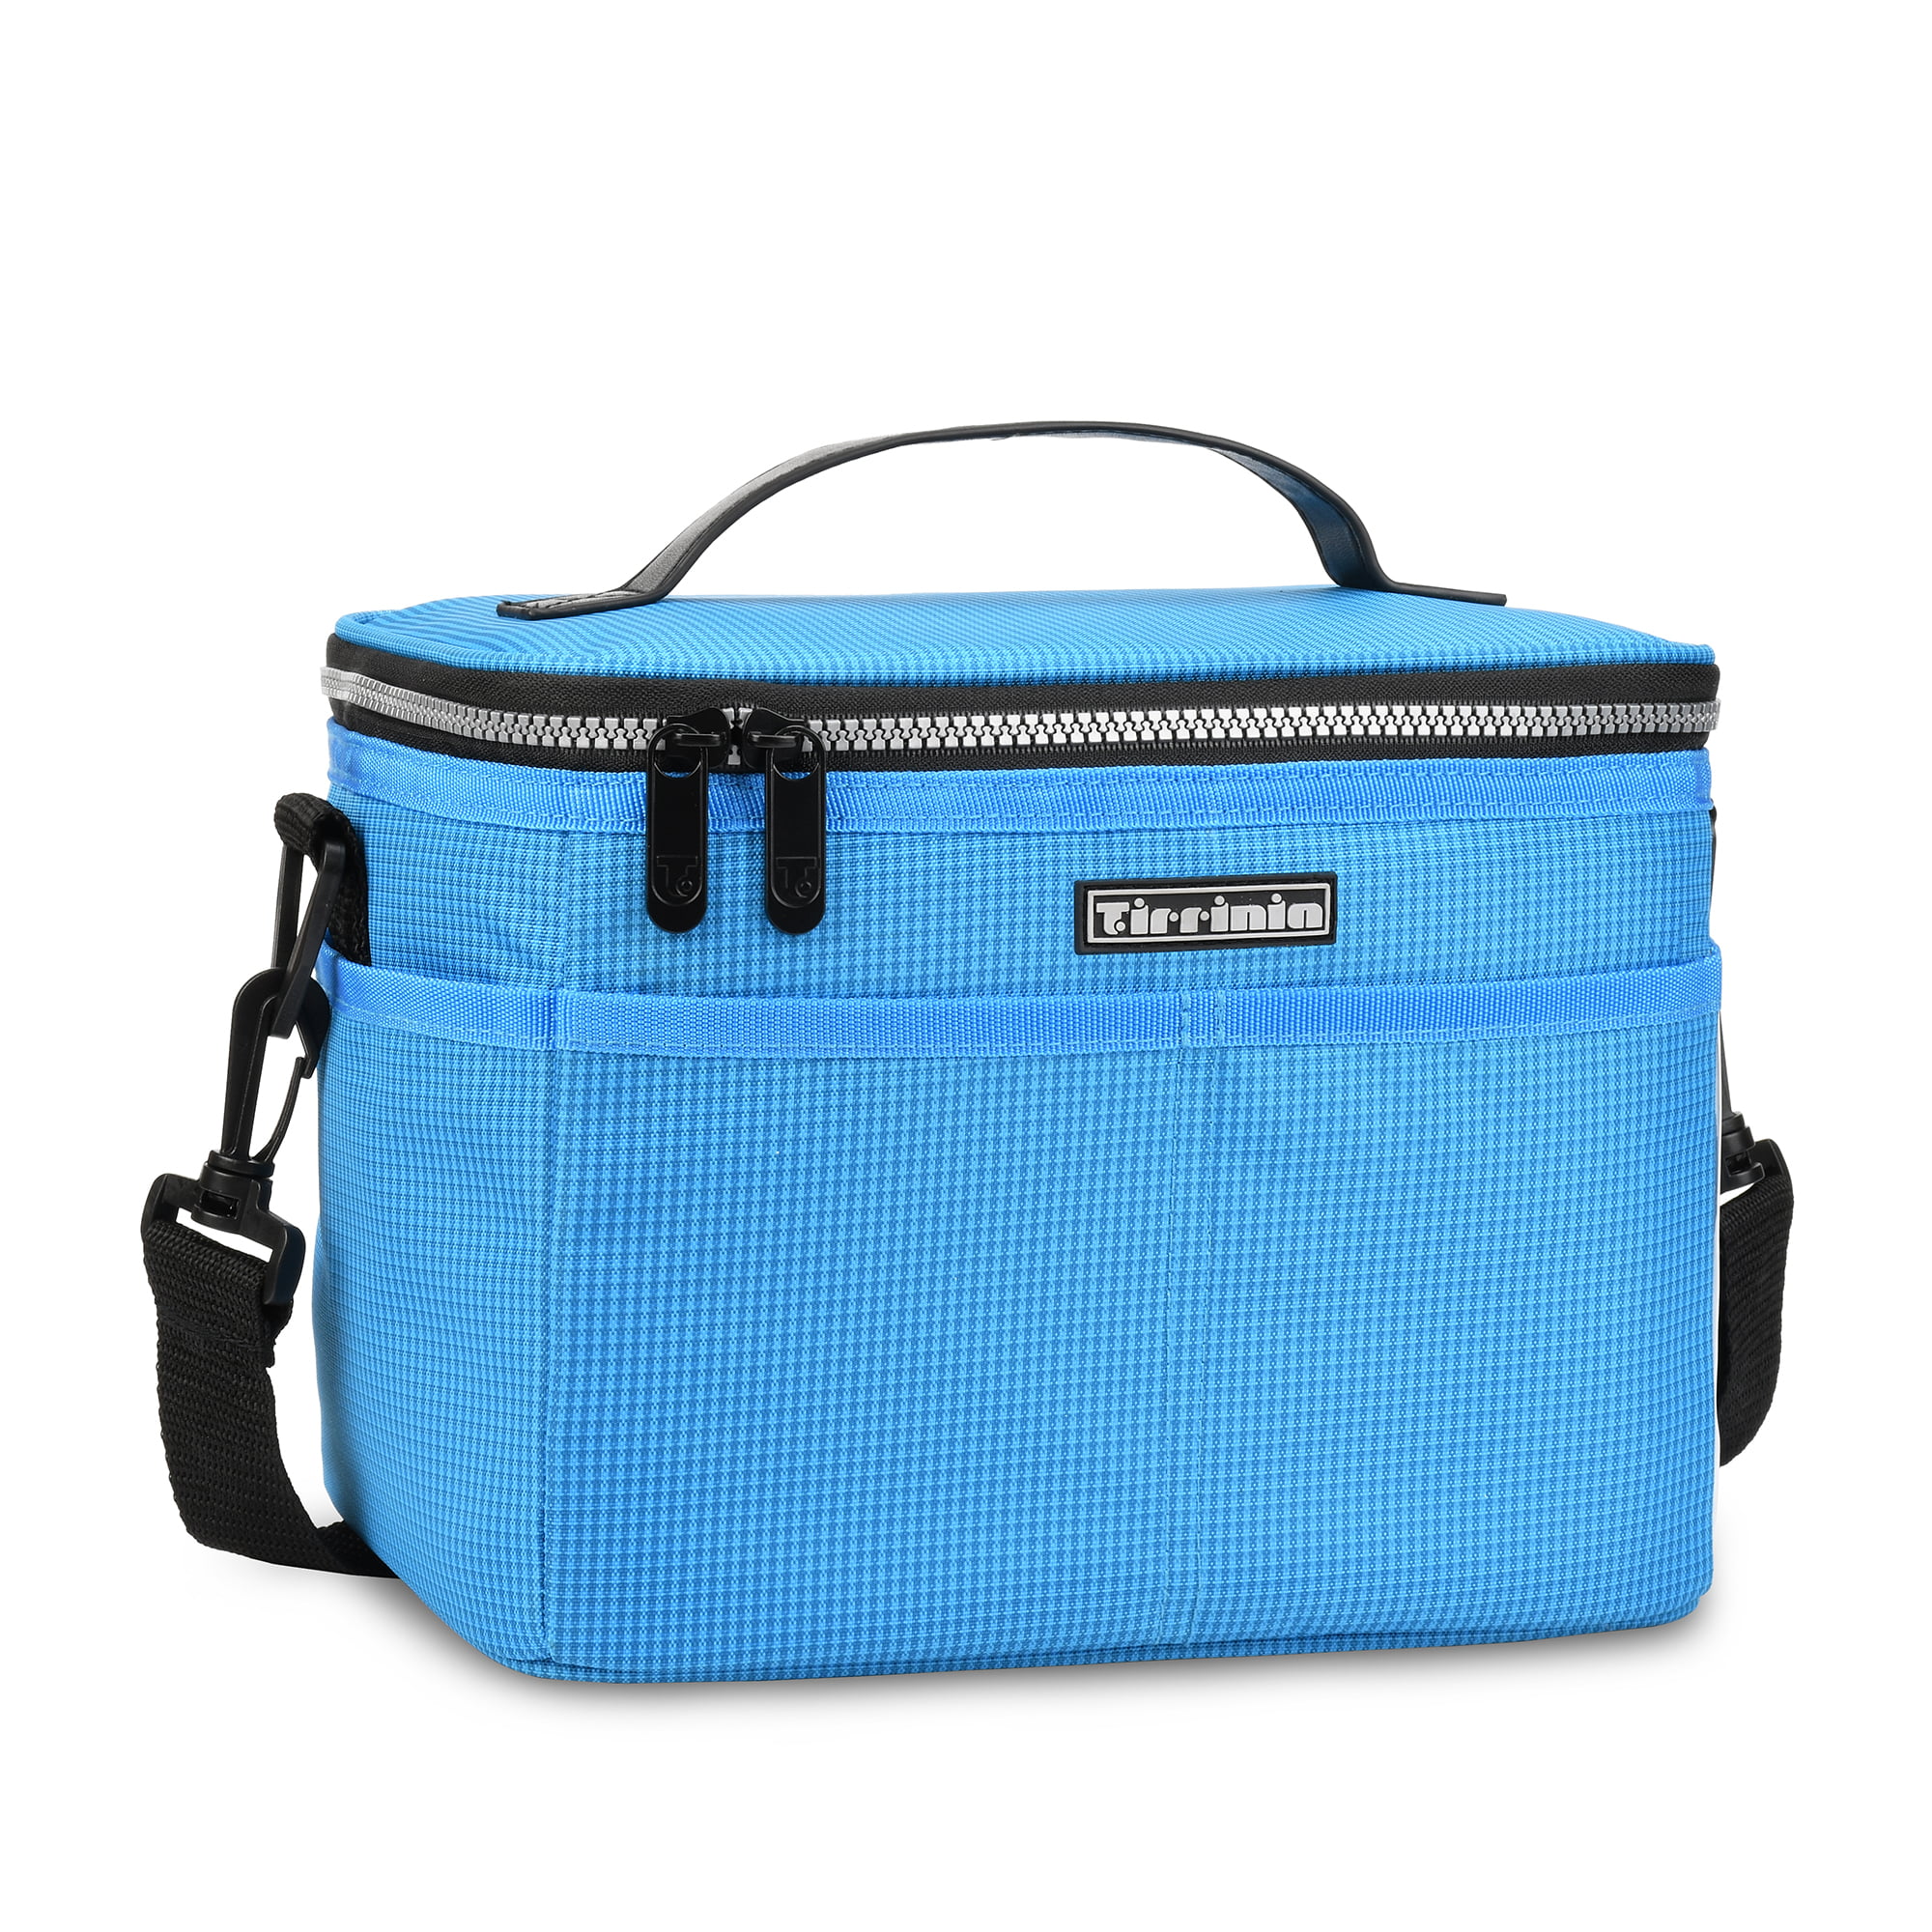 Tirrinia Leakproof Thermal Insulated Women's and Men's Lunch Bag for Work, Blue Checkered - image 1 of 7